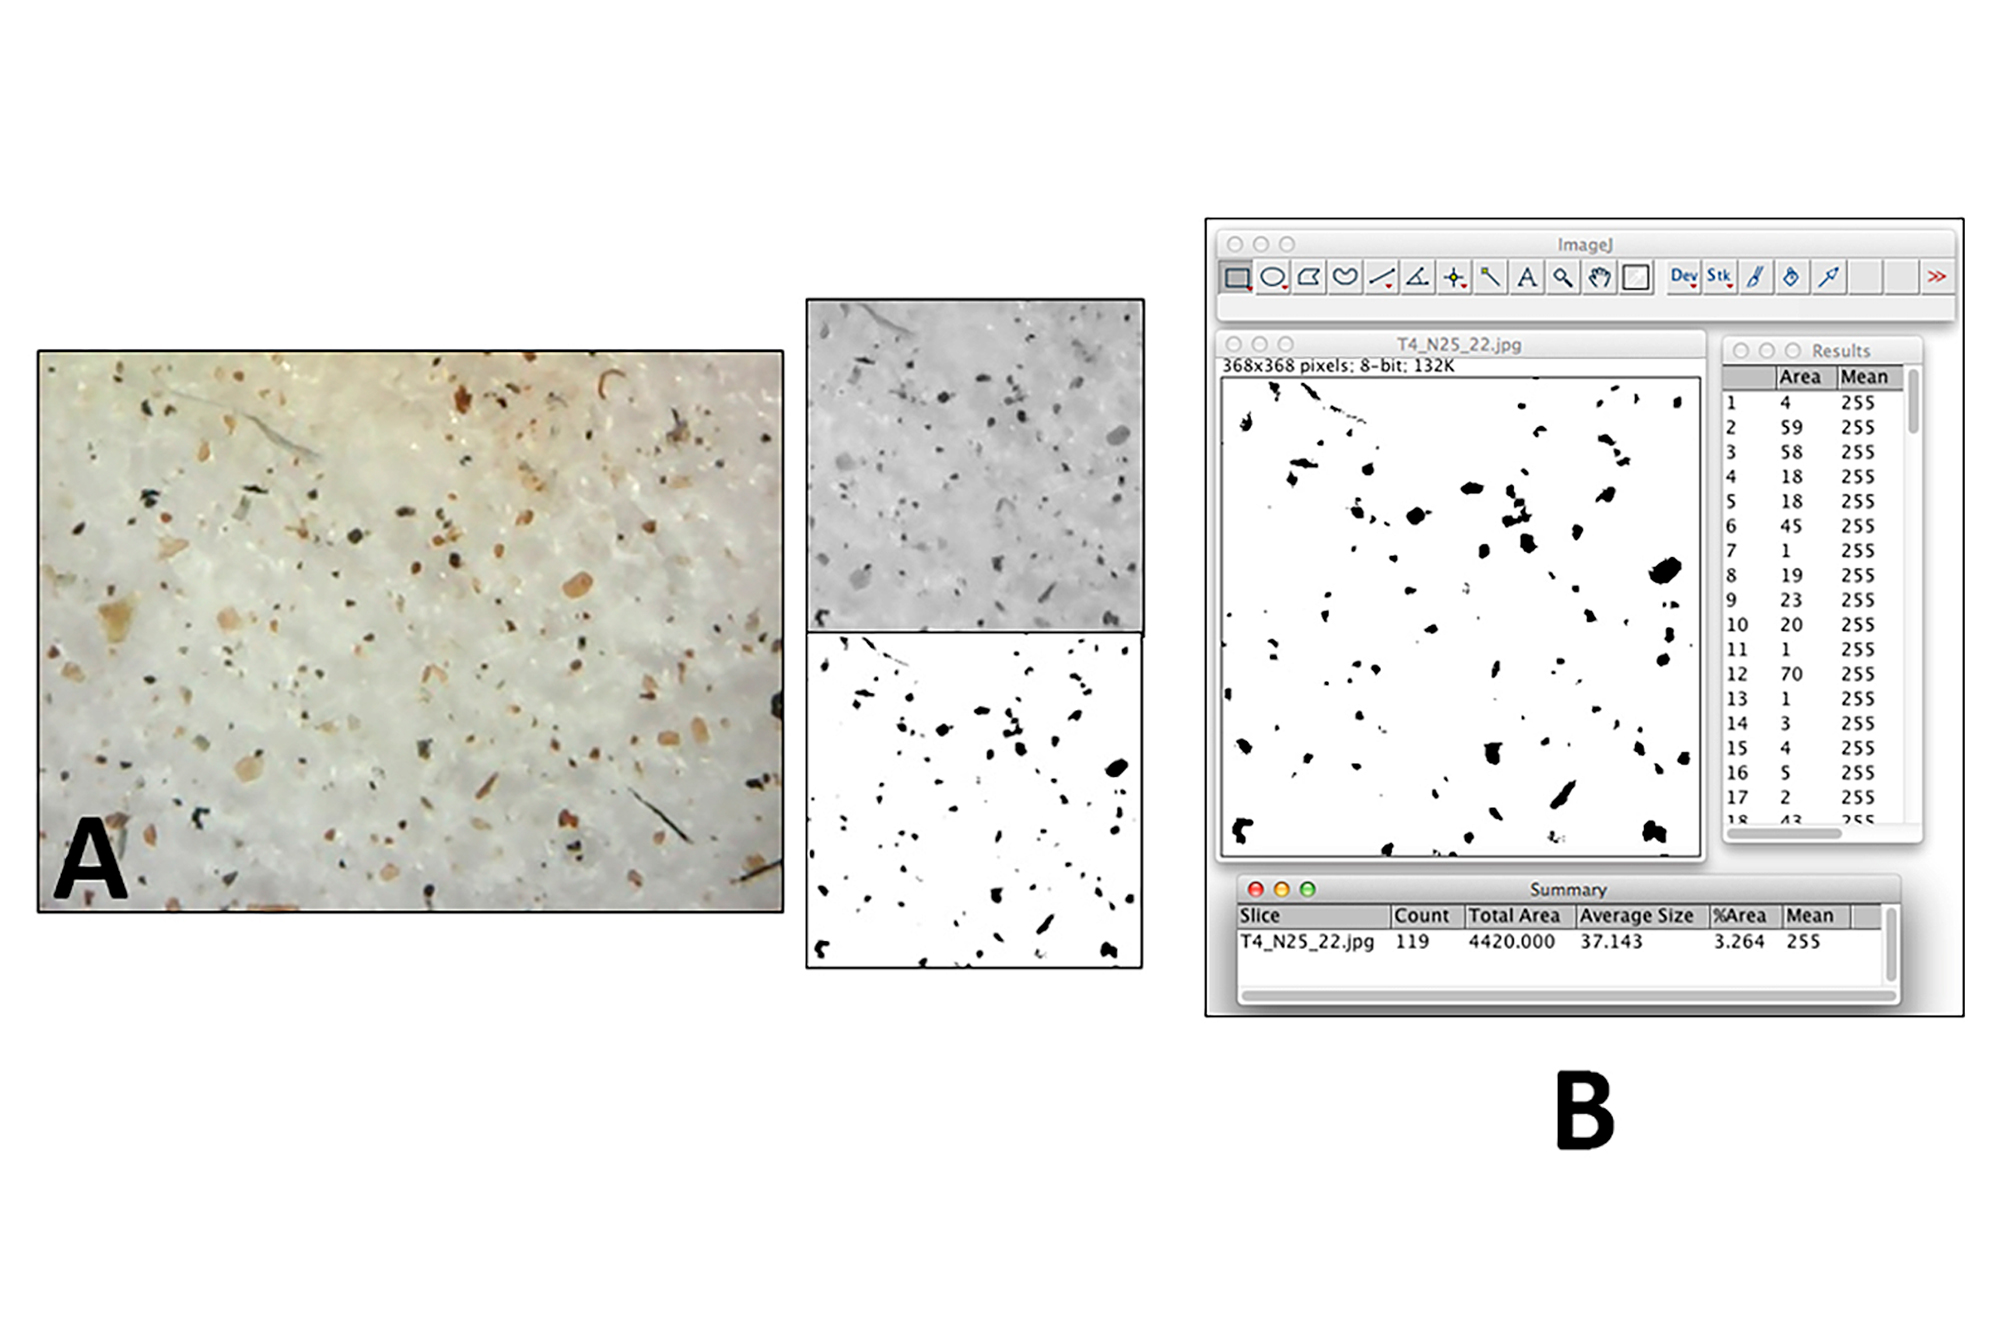 Microphotographs of samples were cropped and converted to greyscale then binary images (A), which allowed their analysis in the software ImageJ (B). The software identifies each separate particle of dust (in black) and calculates its size (in pixels), giving a percentage of the total area covered by dust (%AC).